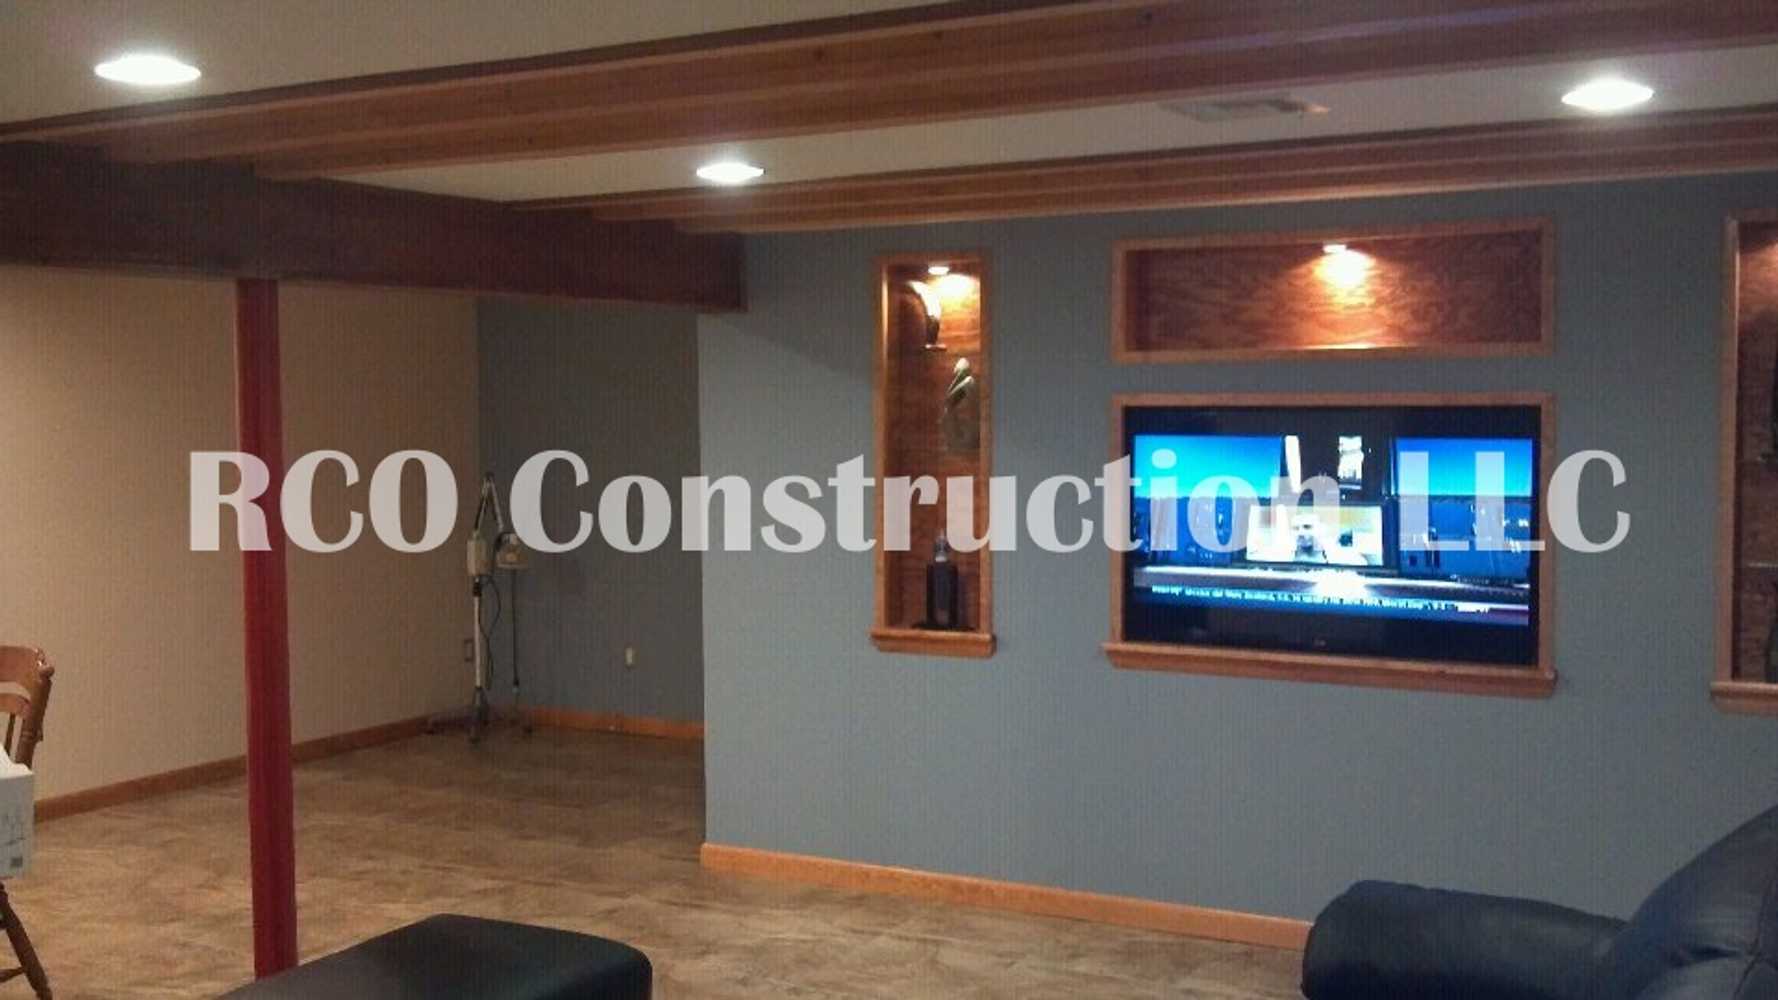 Photos from RCO CONSTRUCTION LLC